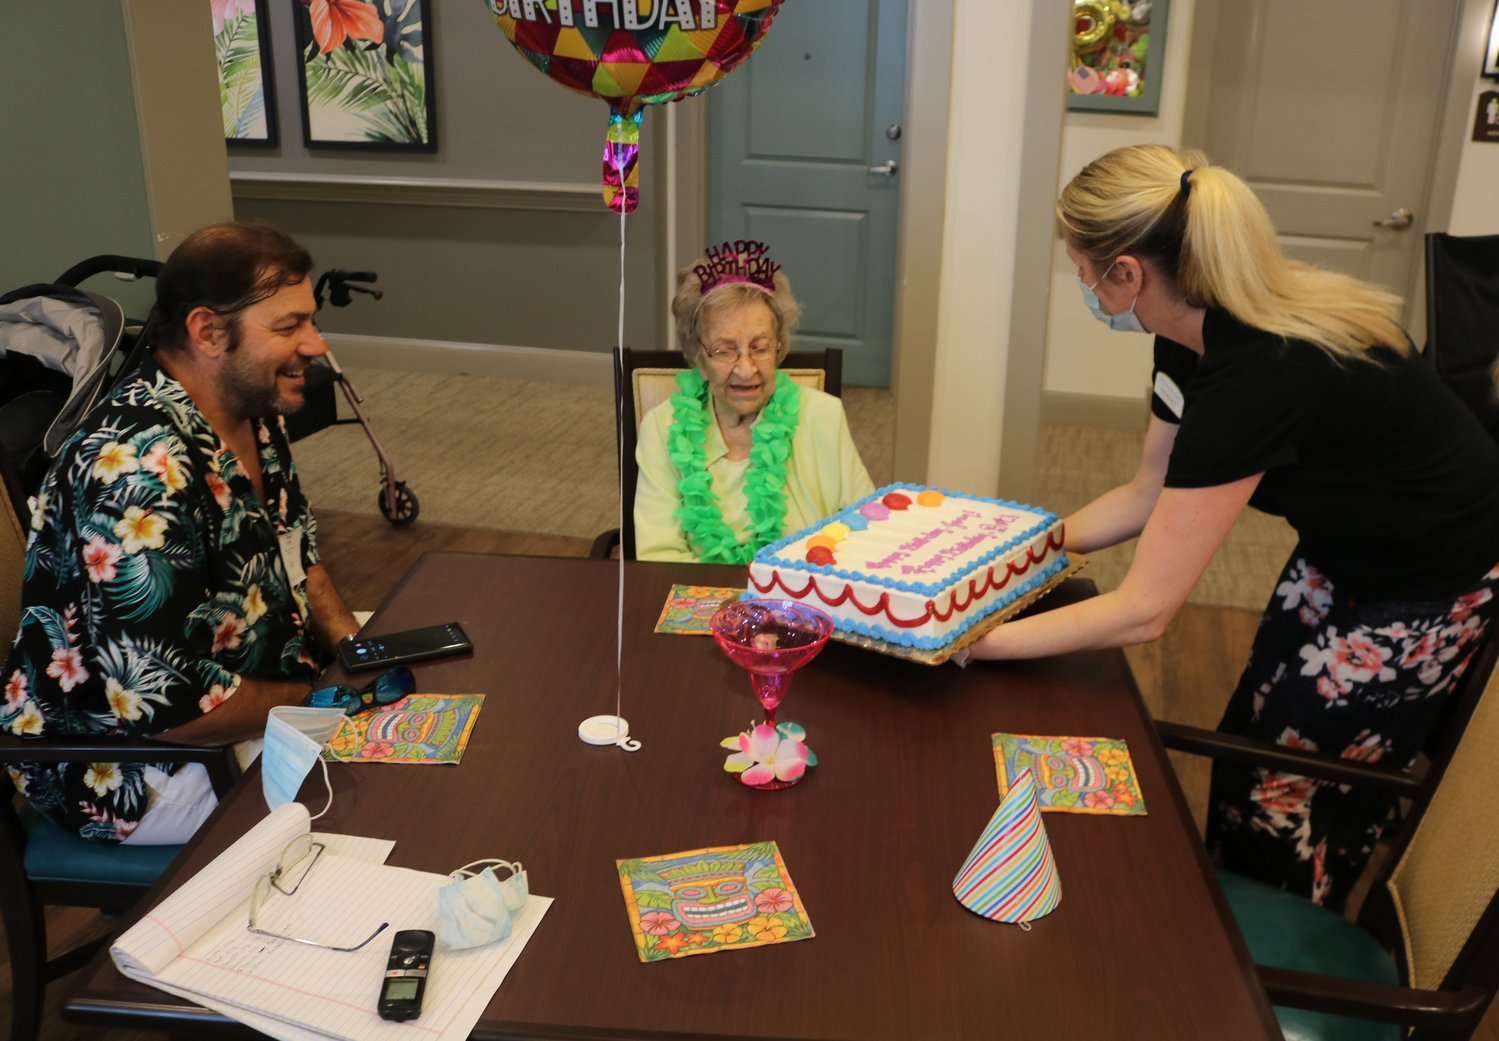 Amanda Jones, memory care director for Starling at Nocatee Assisted Living & Memory Care, right, holds out a birthday cake to 102-year-old Dorothy Coy. At left is grandson Matt Coy.